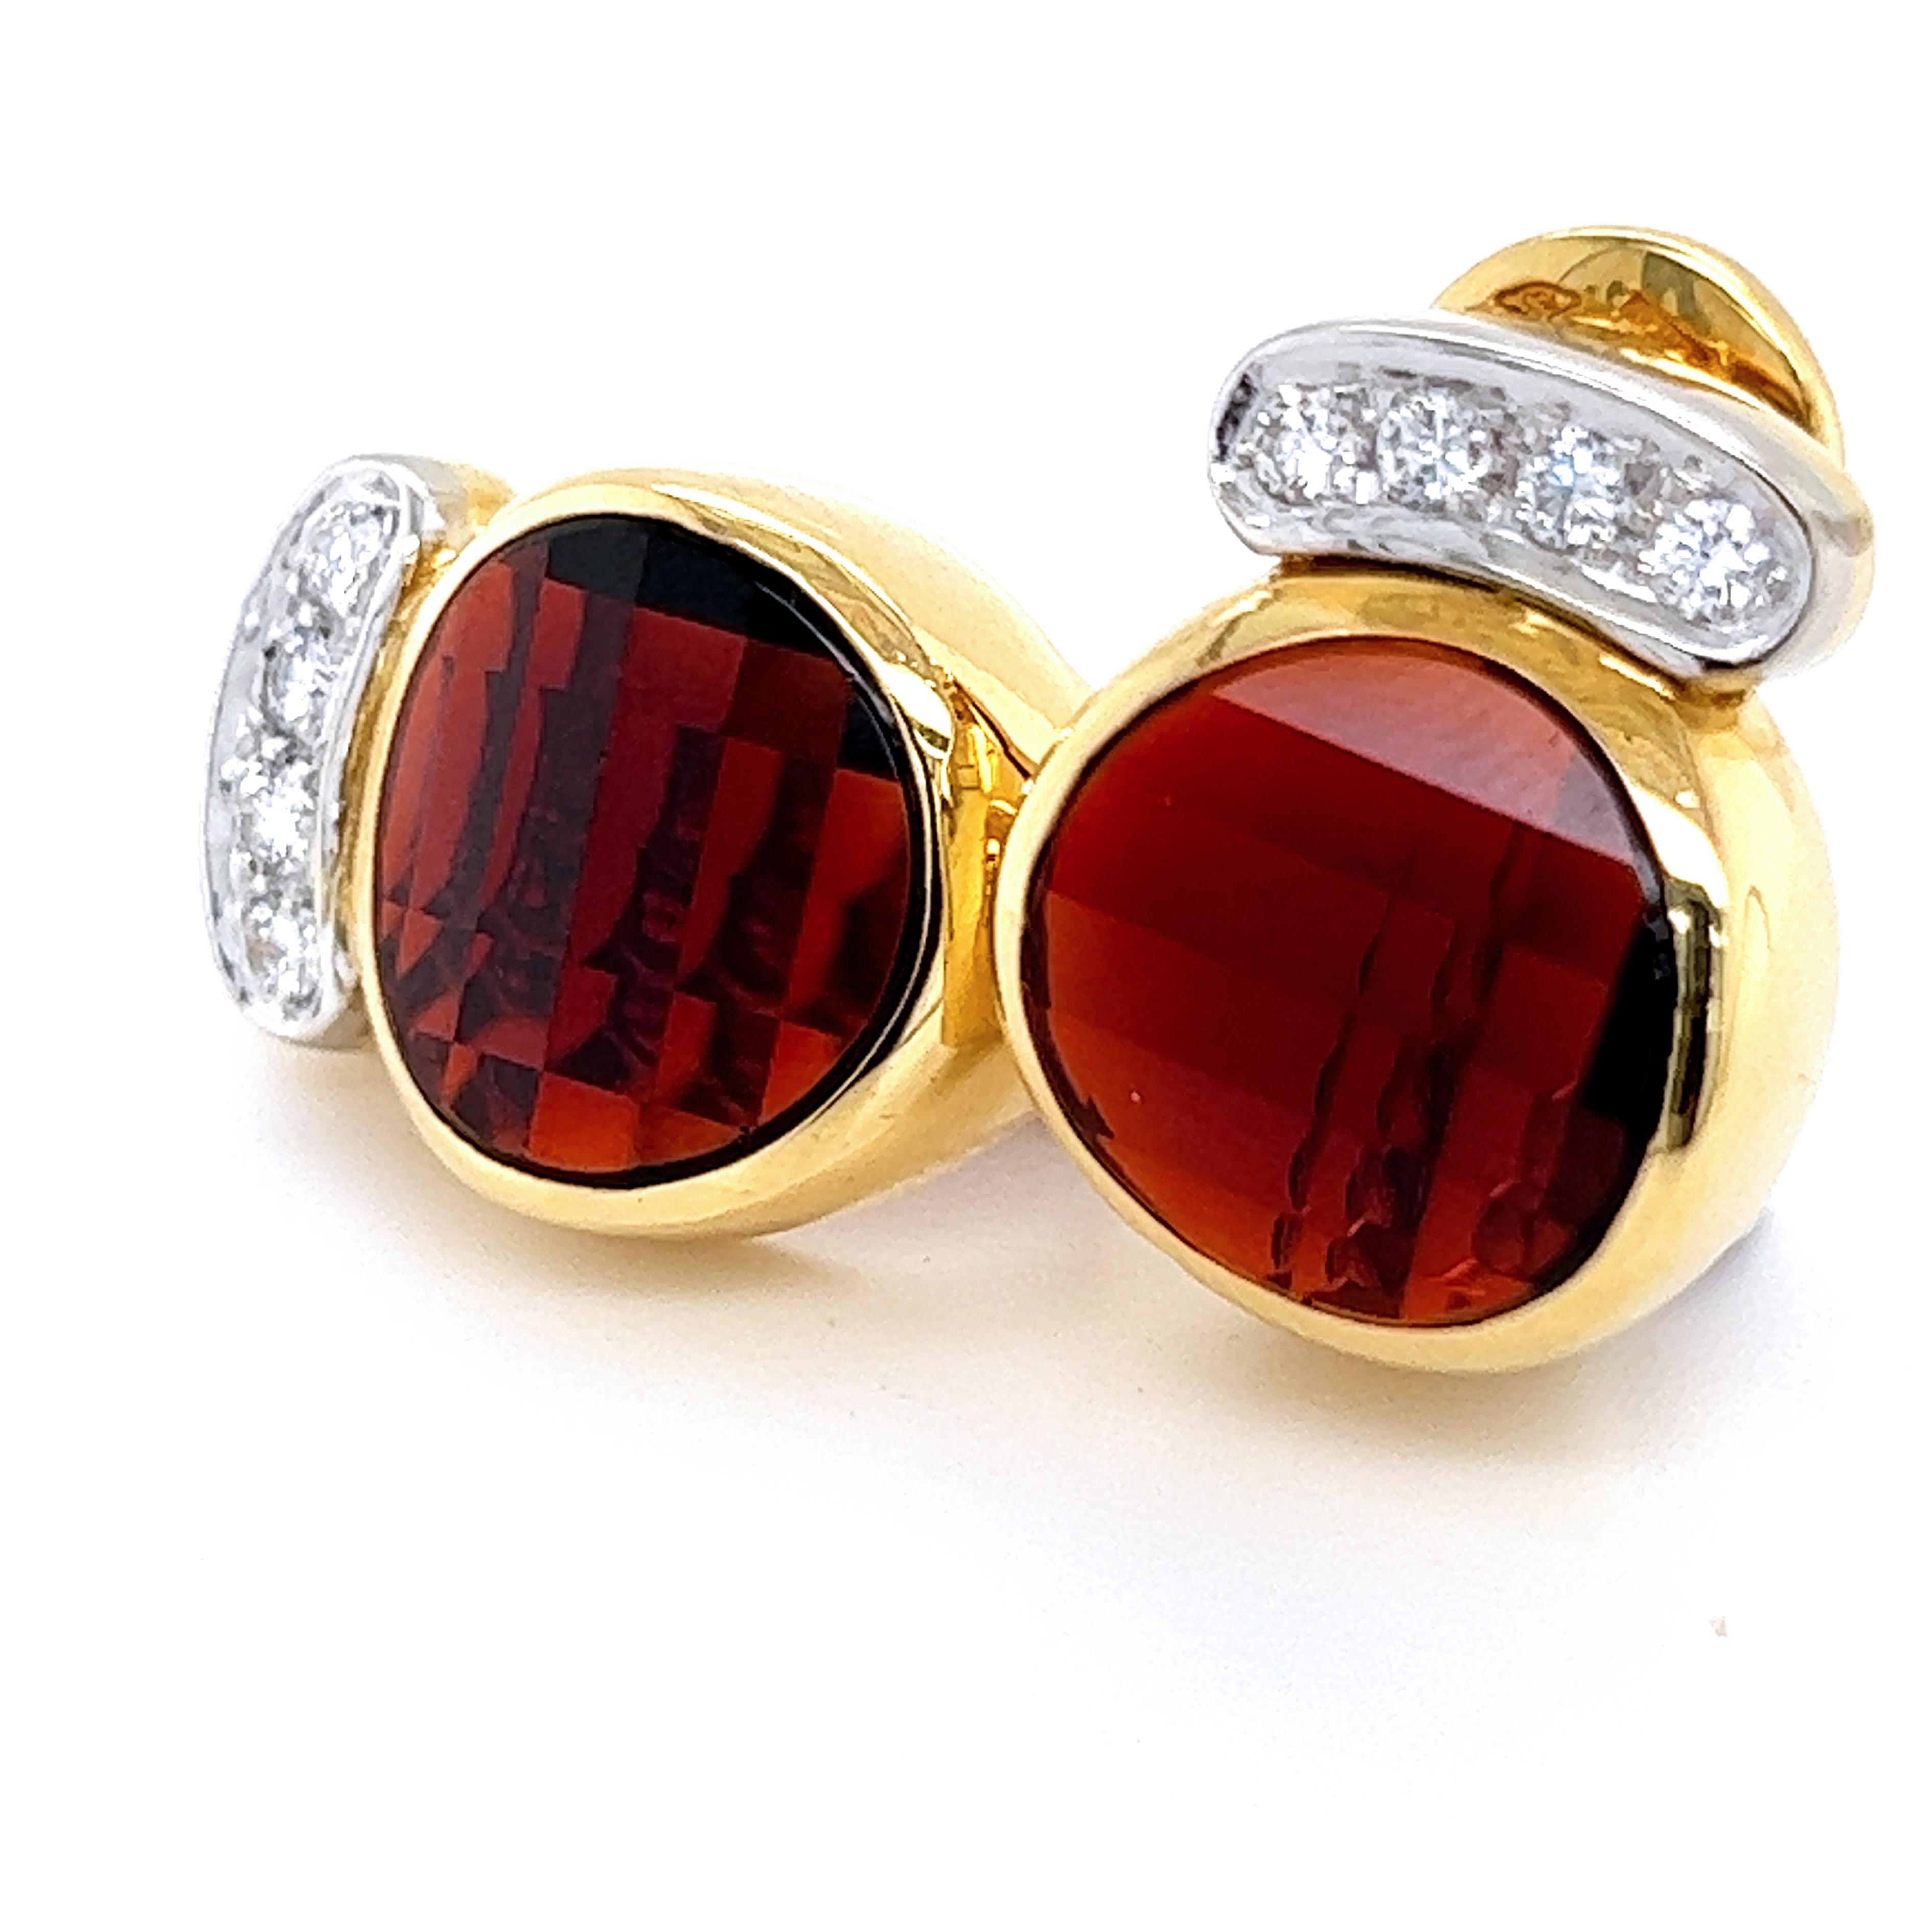 One-of-a-kind, Extra-ordinary, Original 1988 Chic and absolutely Timeless Pomellato A1136 Earrings, here declined in the precious hand inlaid faceted garnet and diamond version, a beautiful example of Italian Craftsman of the period: circa 0.28